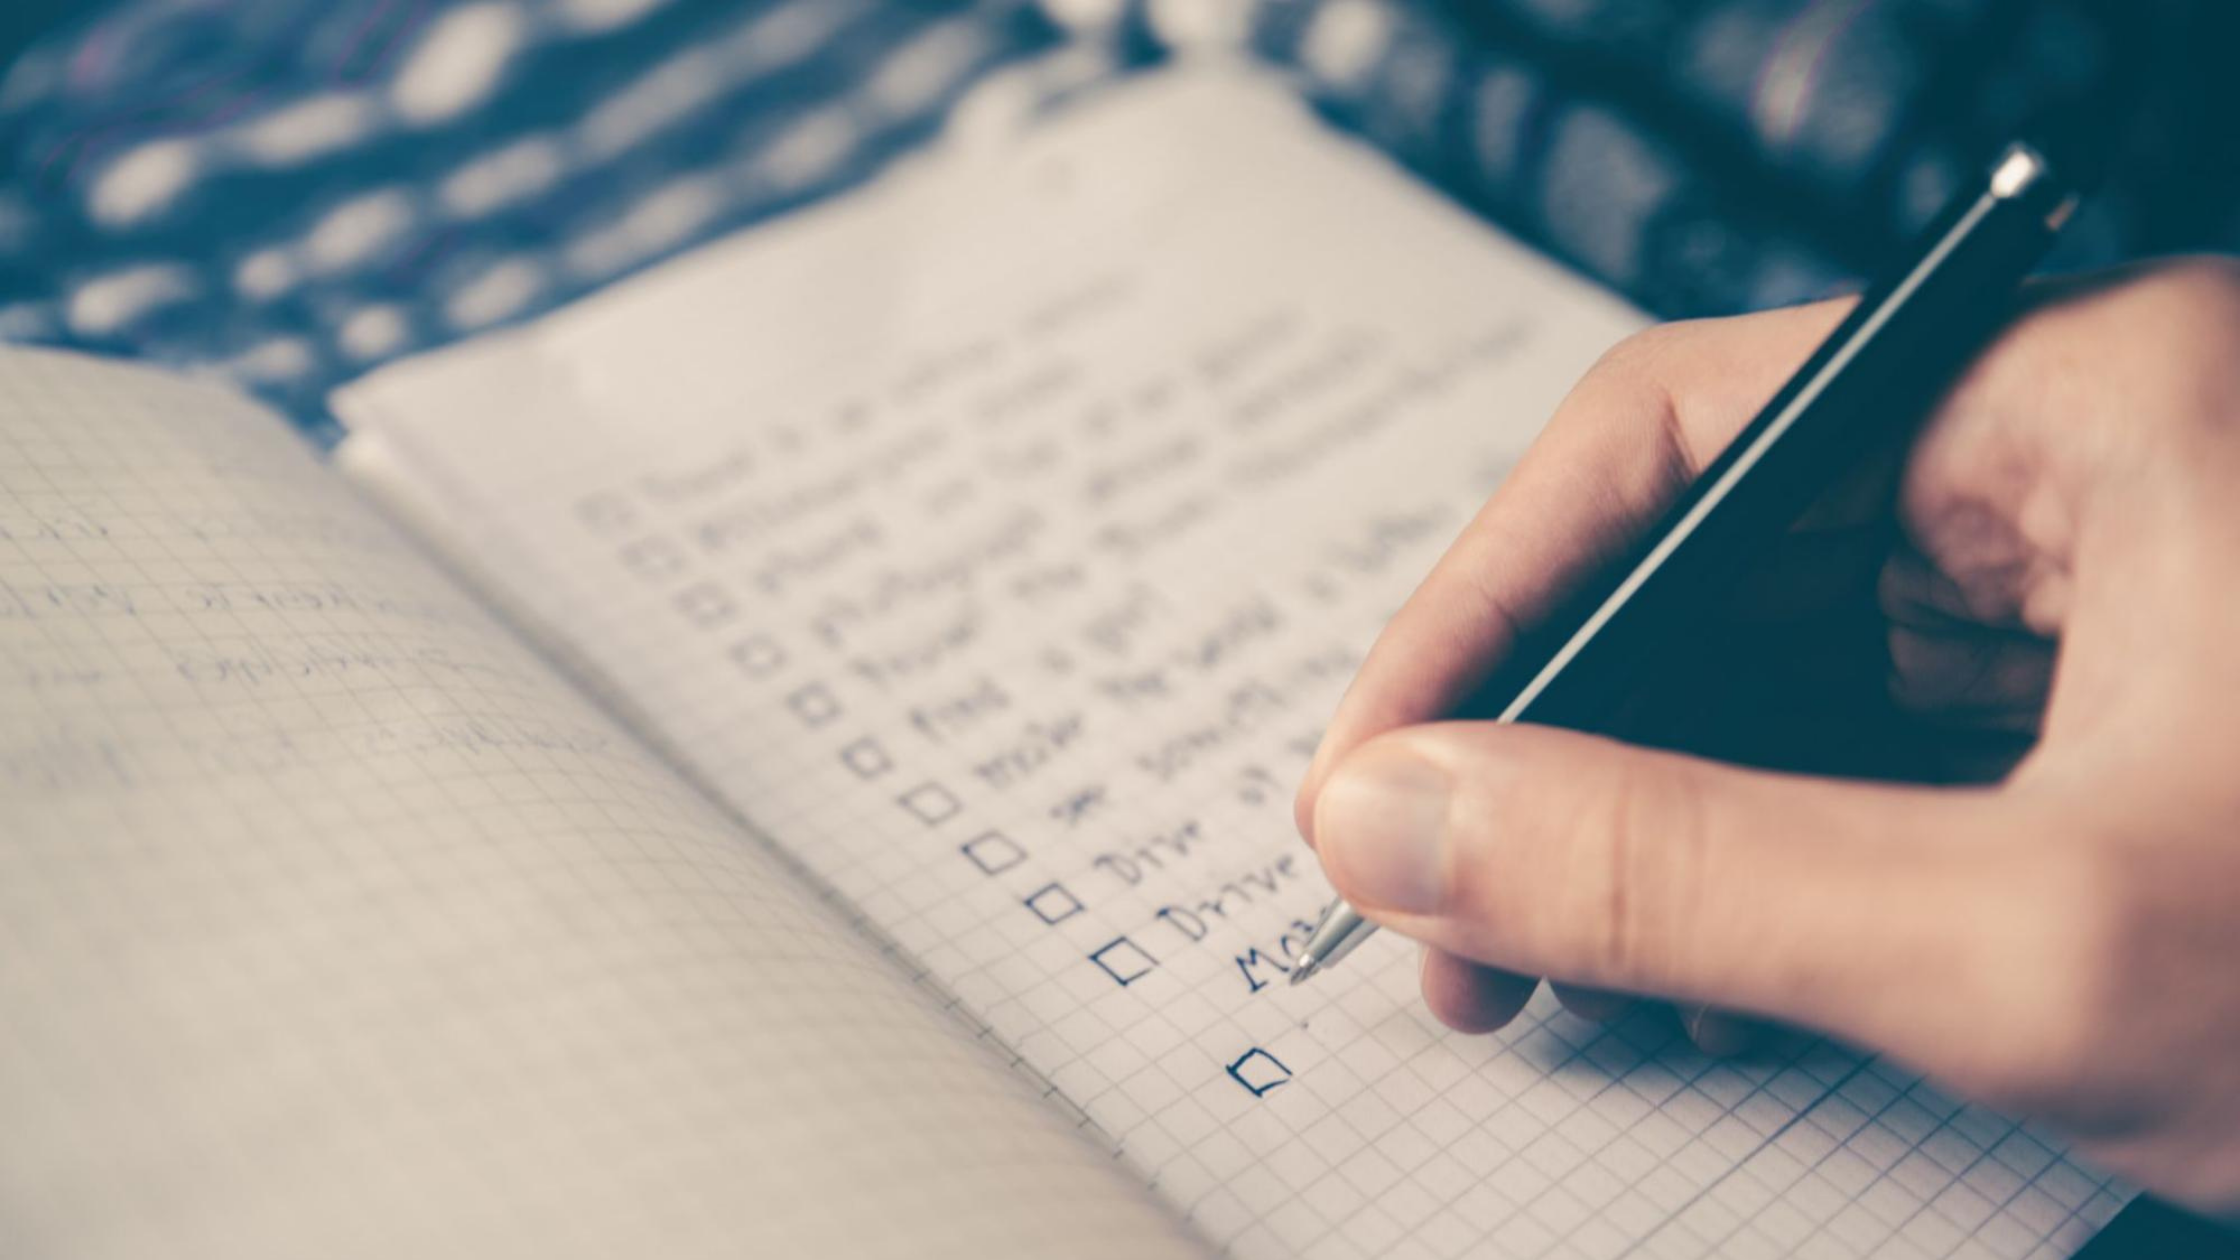 Hand holding a pen, writing a checklist on grid paper